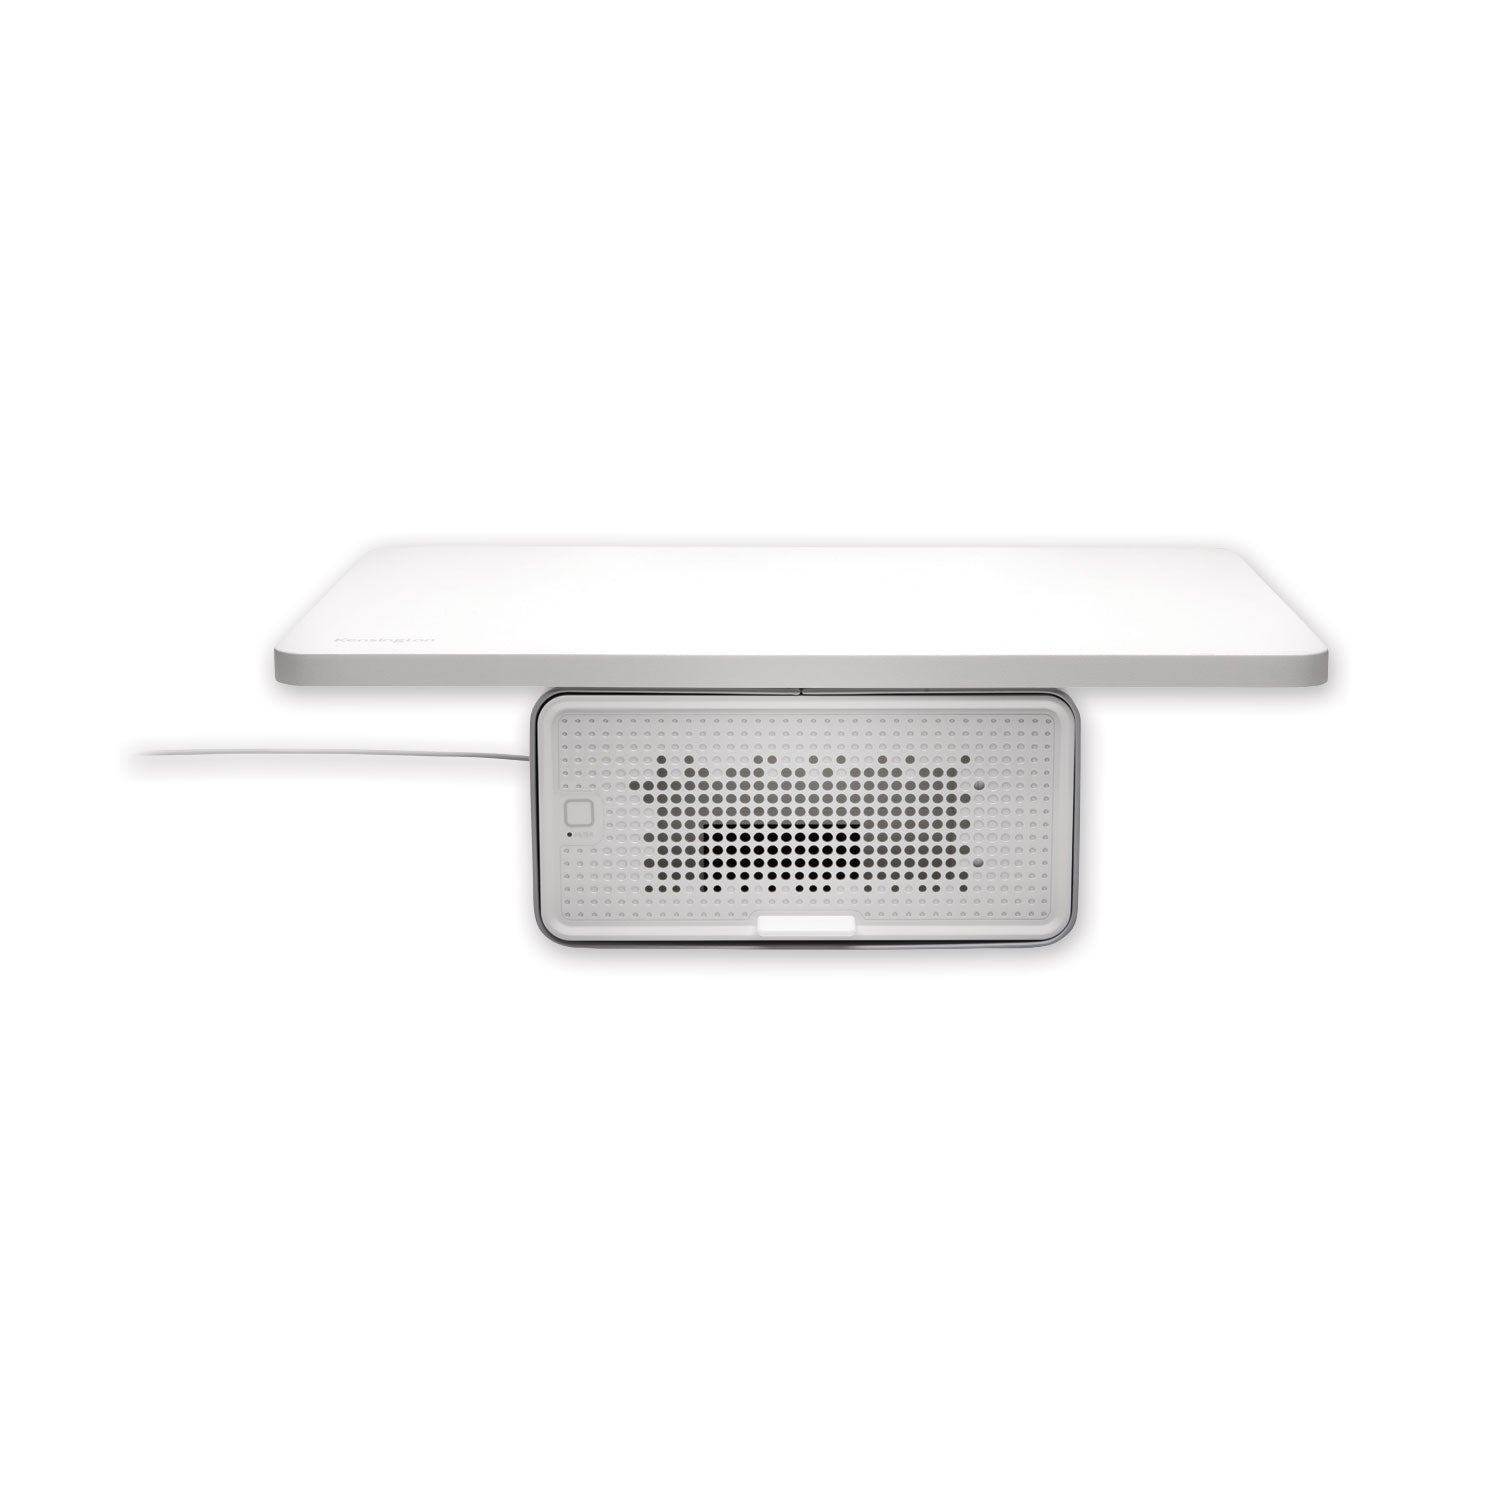 freshview-wellness-monitor-stand-with-air-purifier-for-27-monitors-225-x-115-x-54-white-supports-200-lbs_kmw55460 - 1